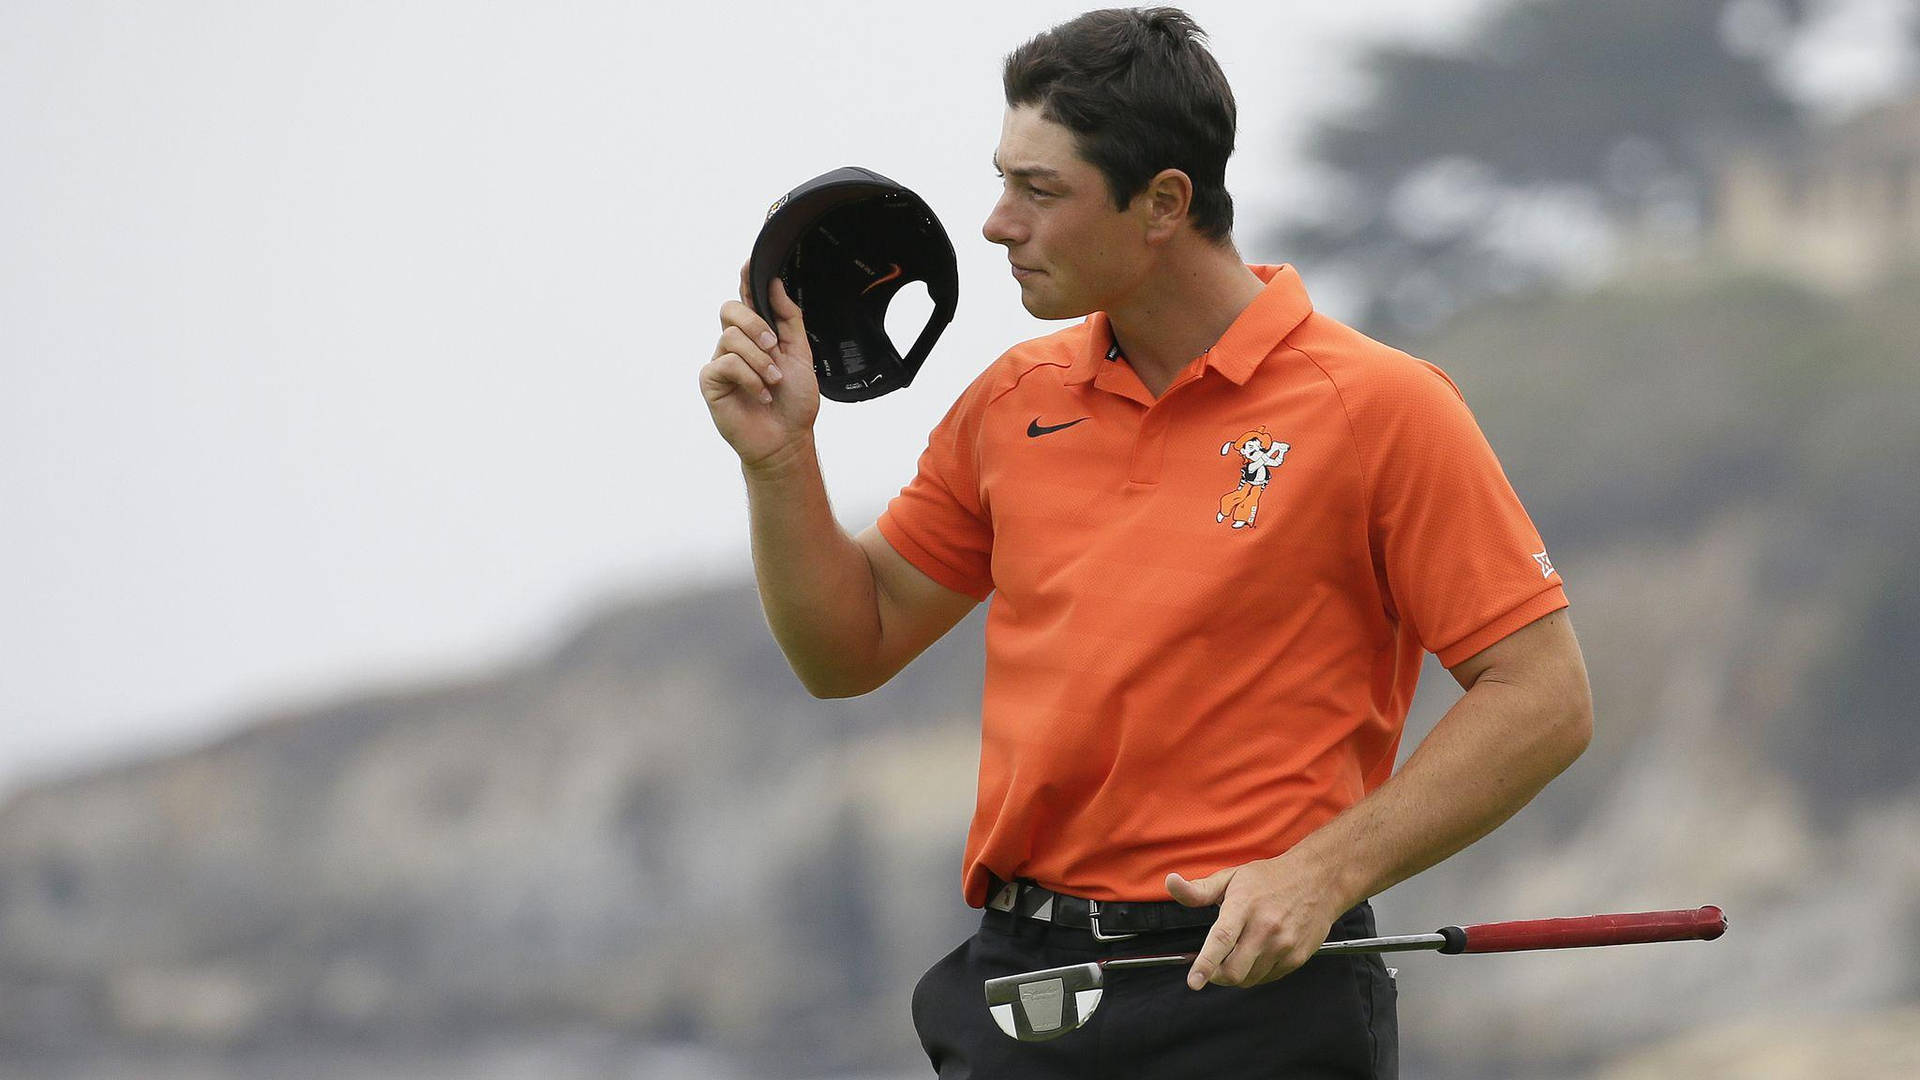 Viktor Hovland With His Hat Off Wallpaper